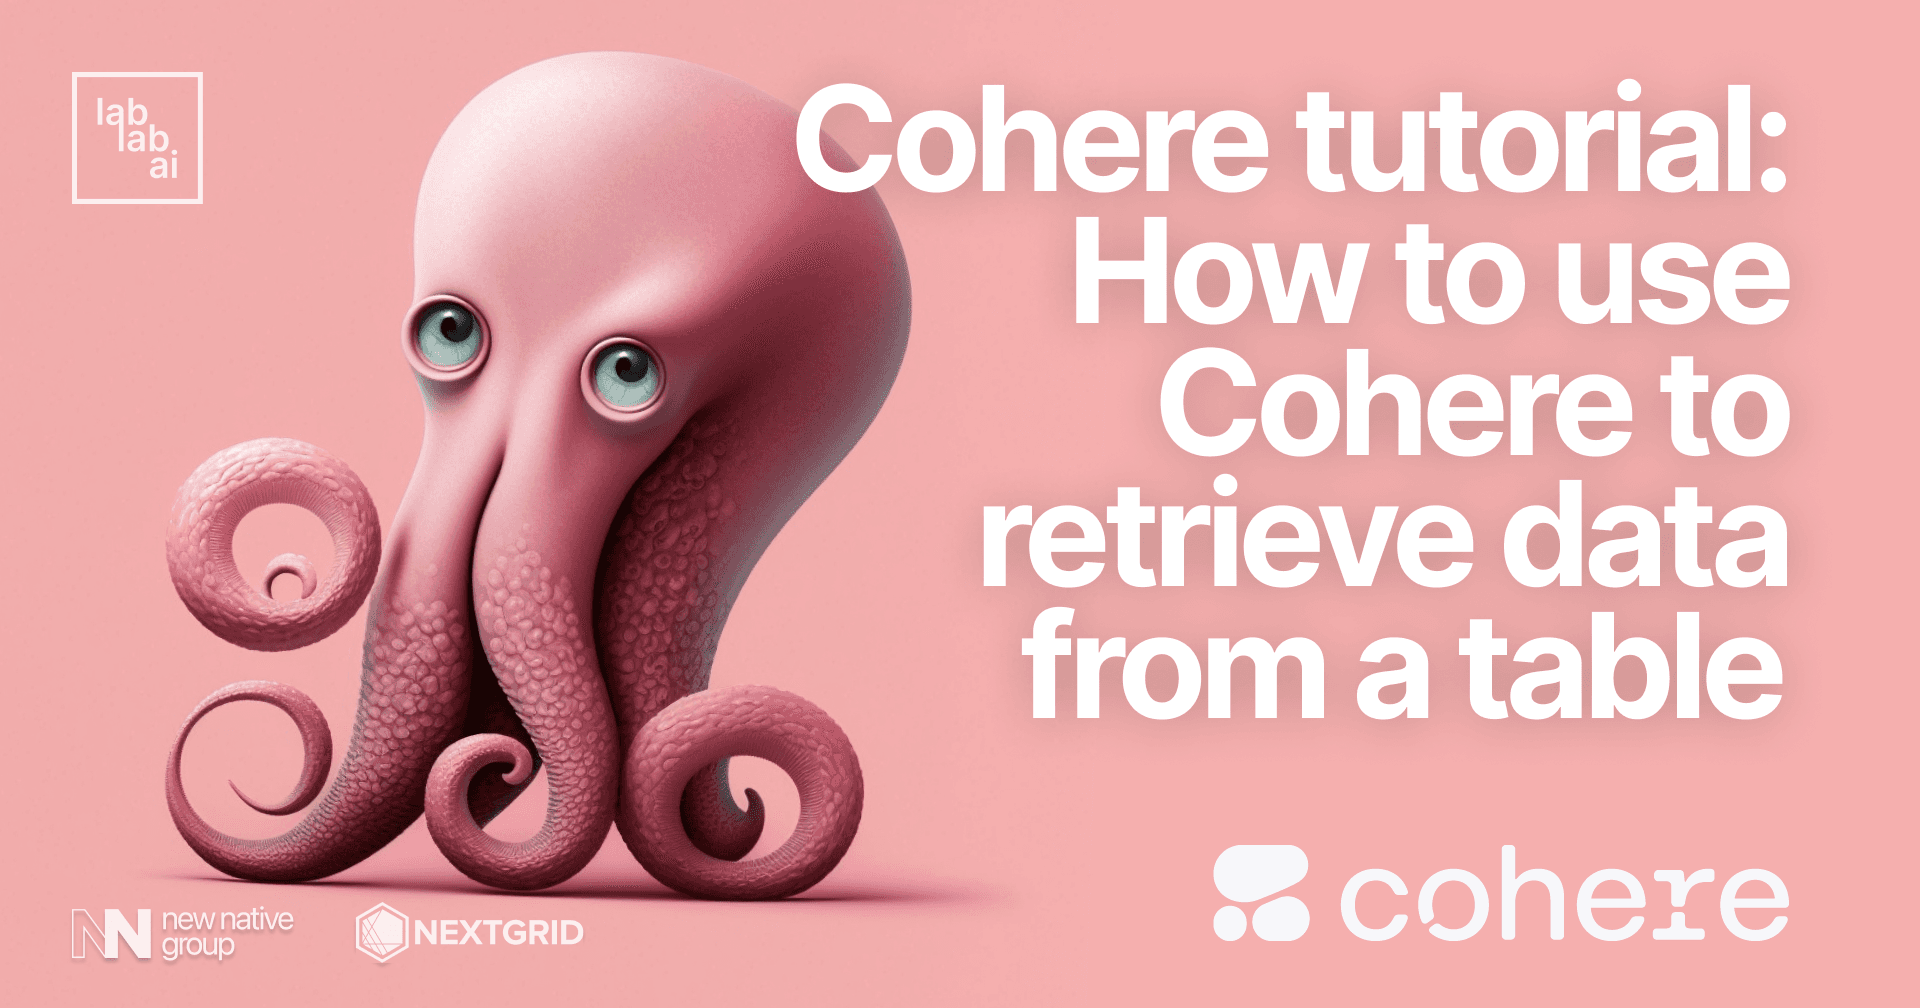 Cohere tutorial: Answering questions based on given data tutorial